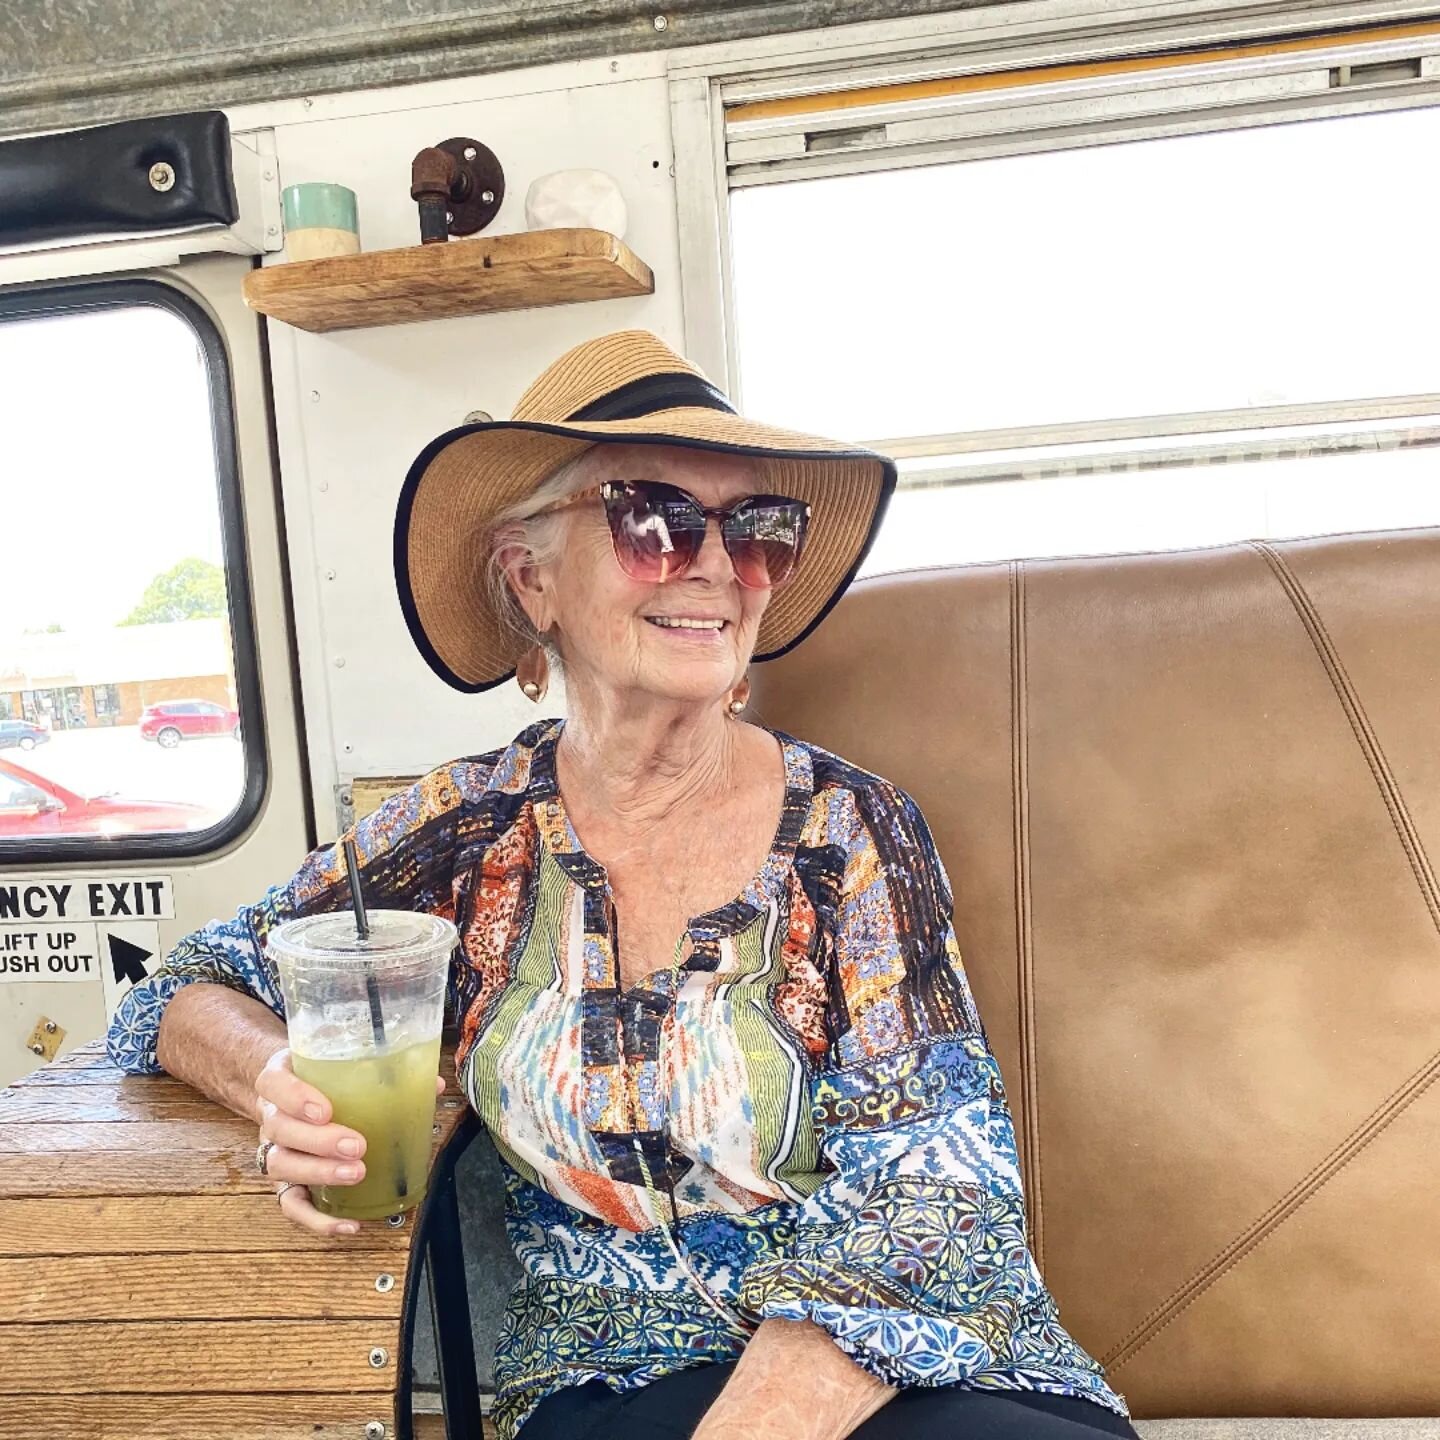 We met Beth on the Bus today. Her radiant smile reflects gratitude for a life full of blessings. Tomorrow Beth will celebrate her grandson's wedding, but today she is rediscovering her natural talent as a model. &quot;I was 16 years old the last time